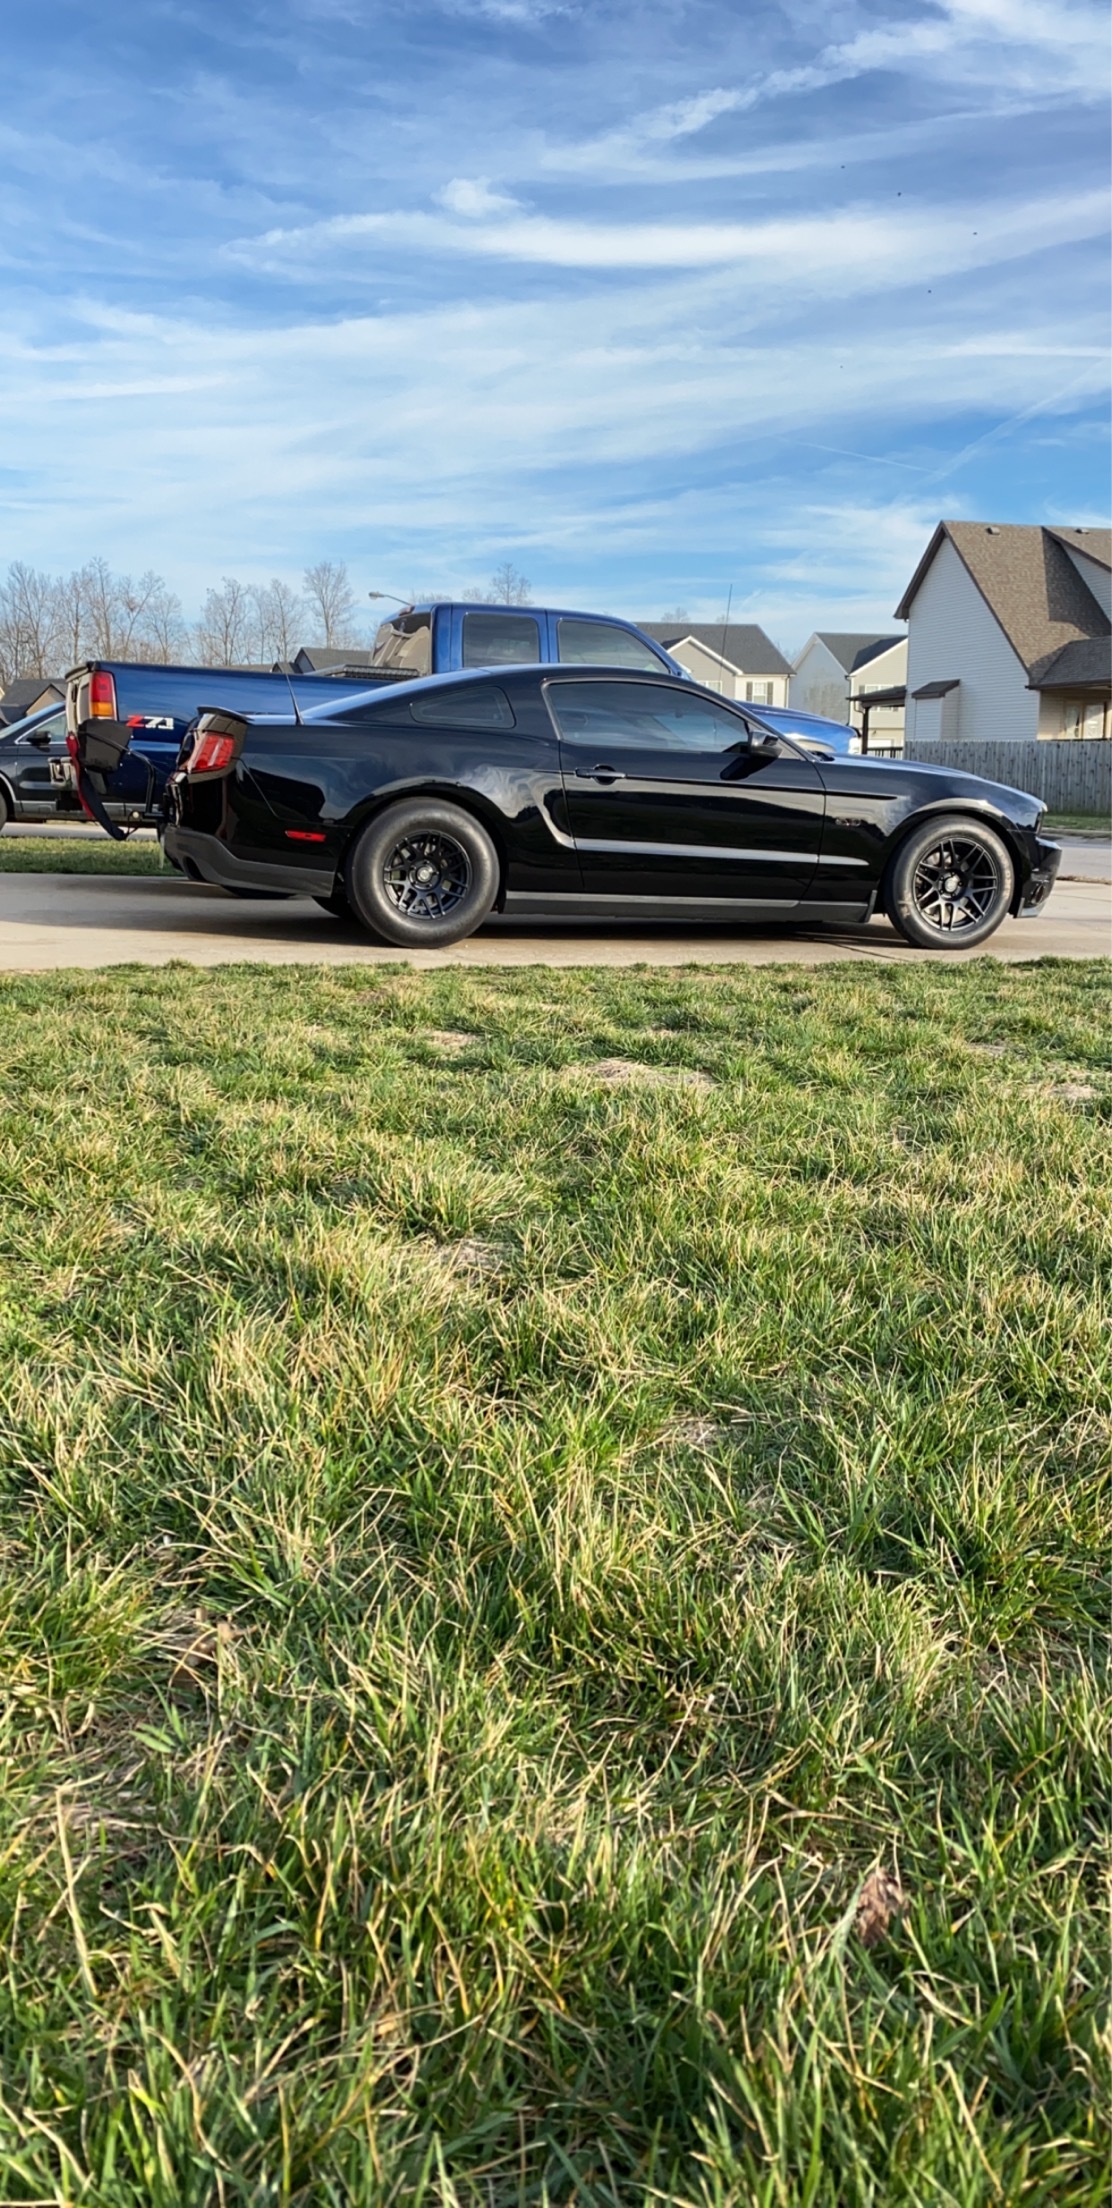 2012 Black Ford Mustang GT picture, mods, upgrades